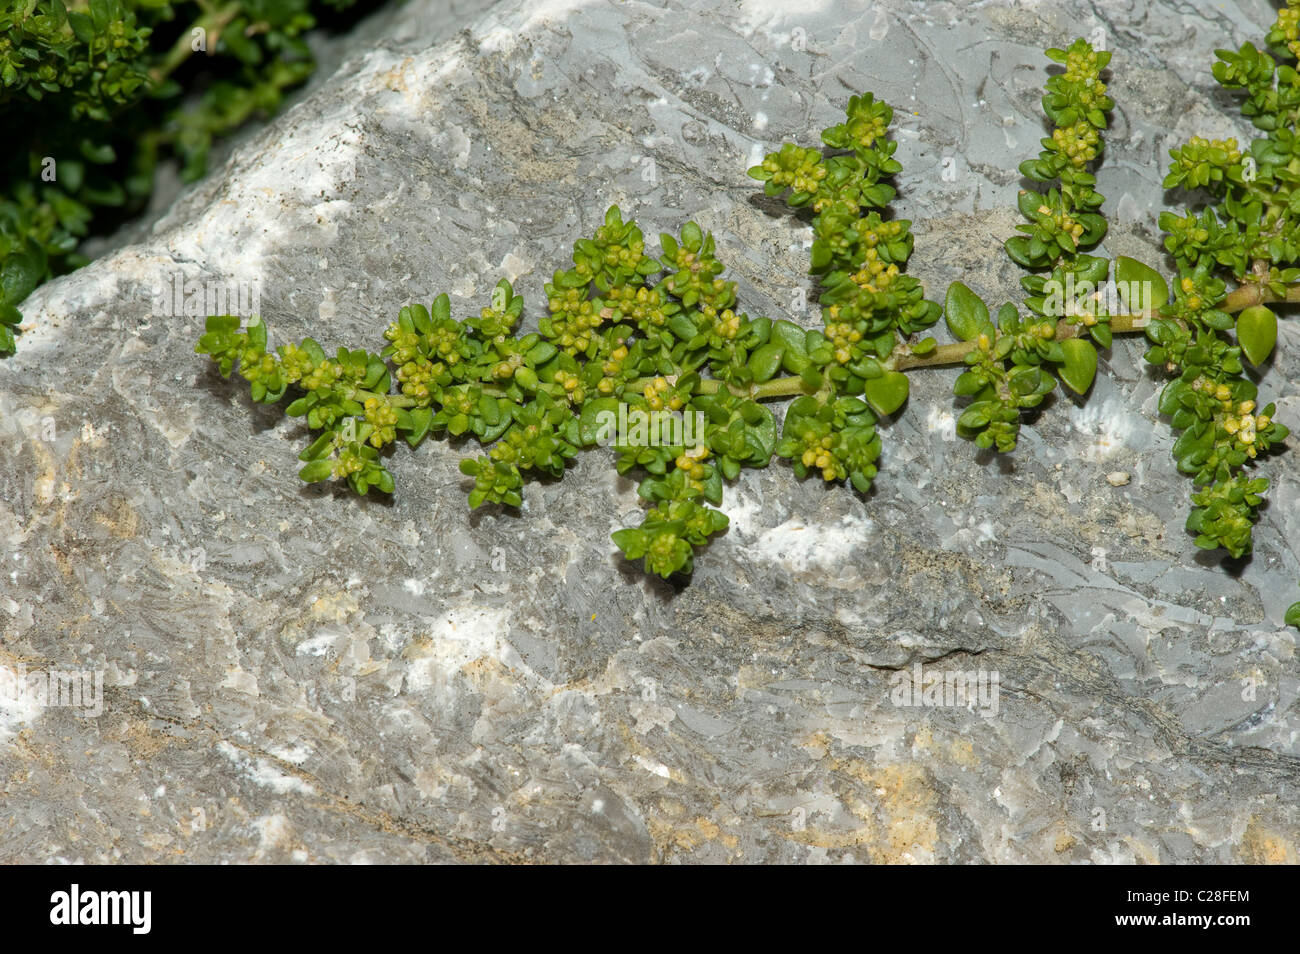 Smooth Rupturewort (Herniaria glabra), flowering plant on a rock. Stock Photo